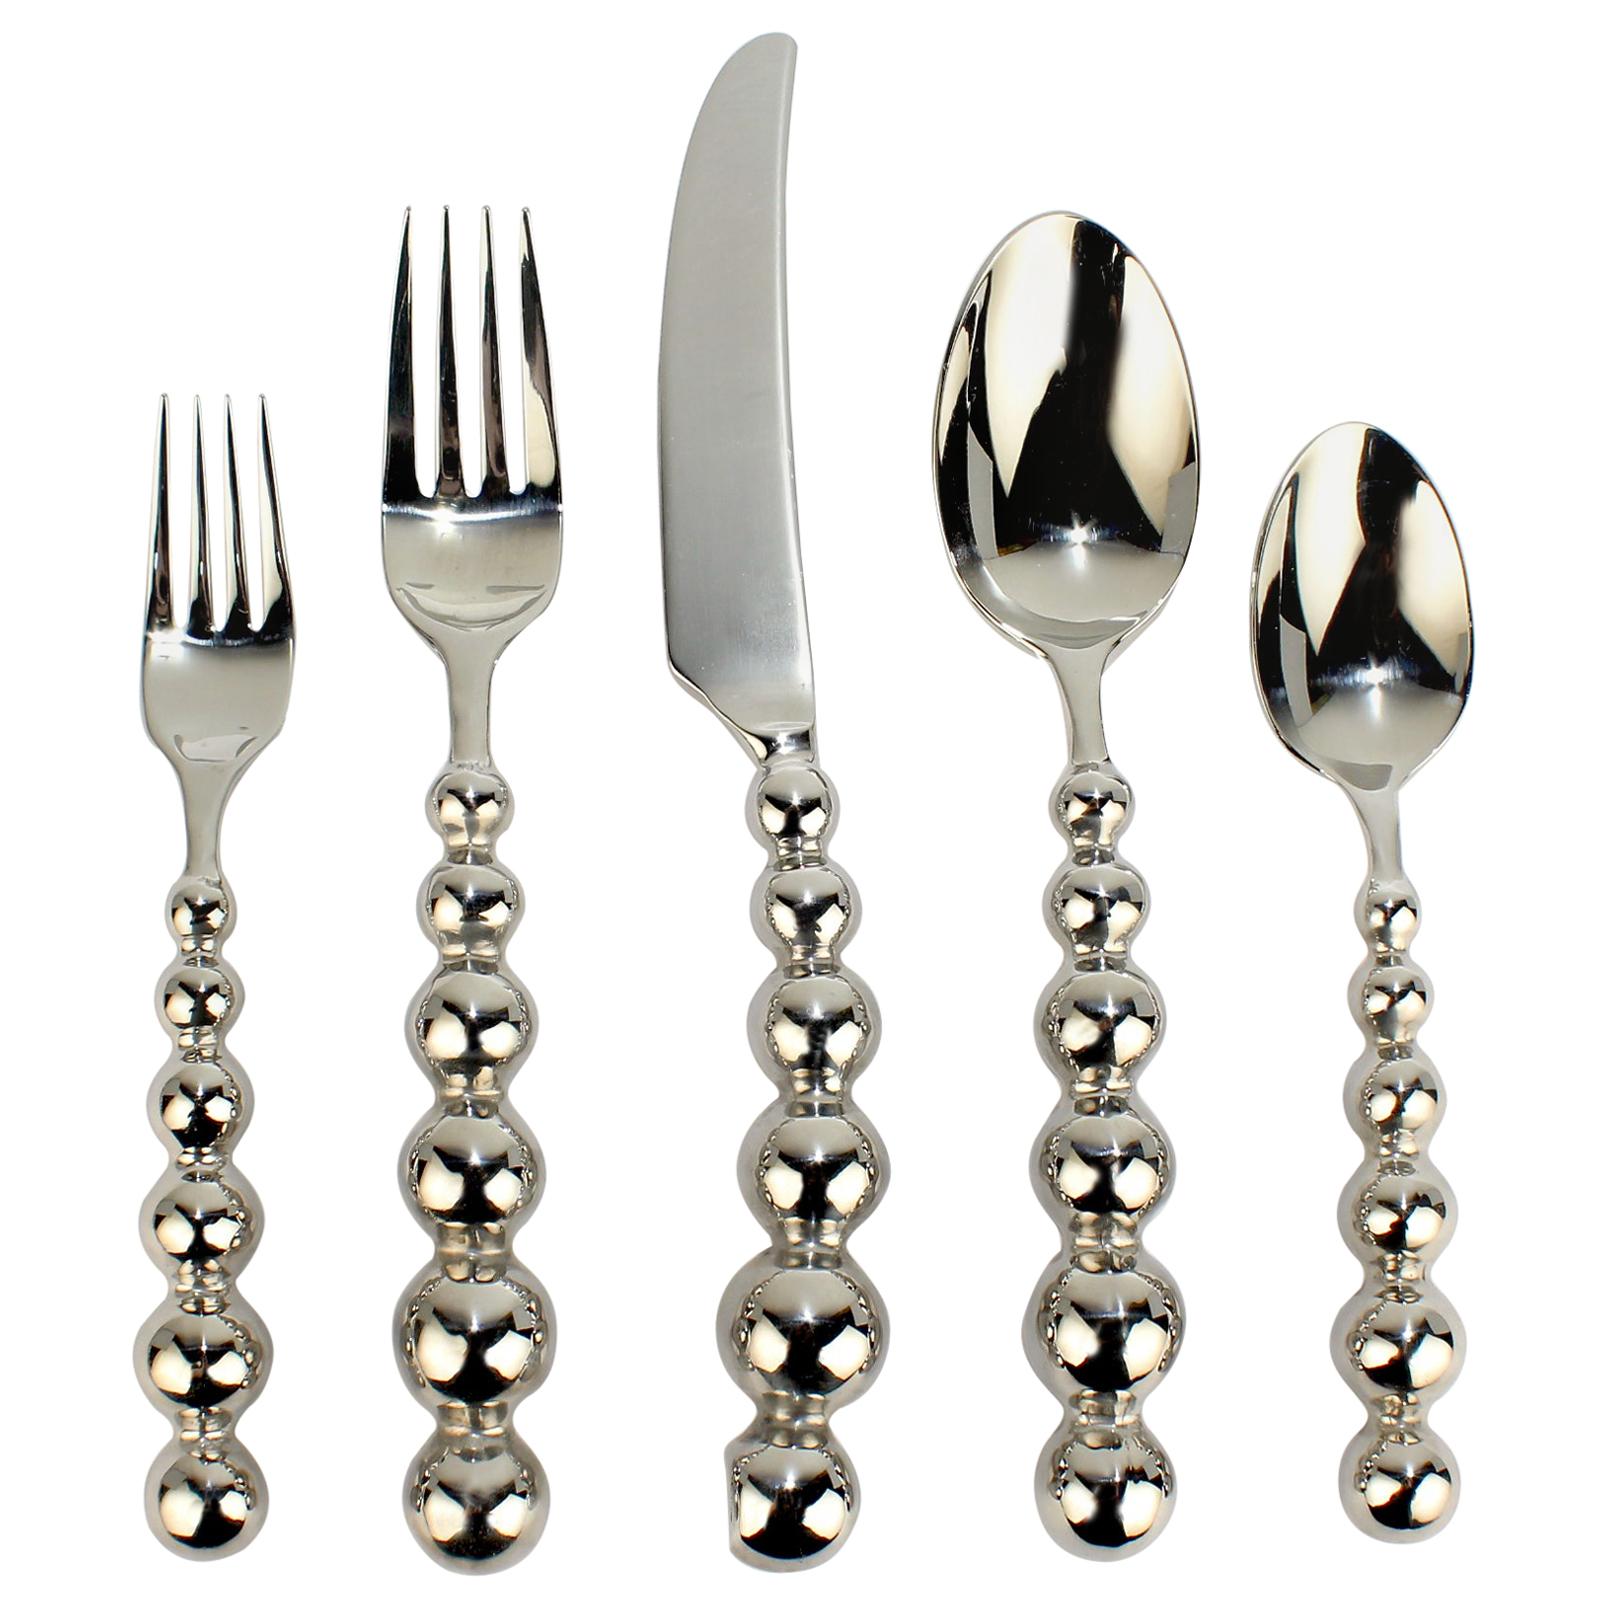 60 Pc Space Age Galaxy Pattern Stainless Steel Flatware Set by Cambridge for 12